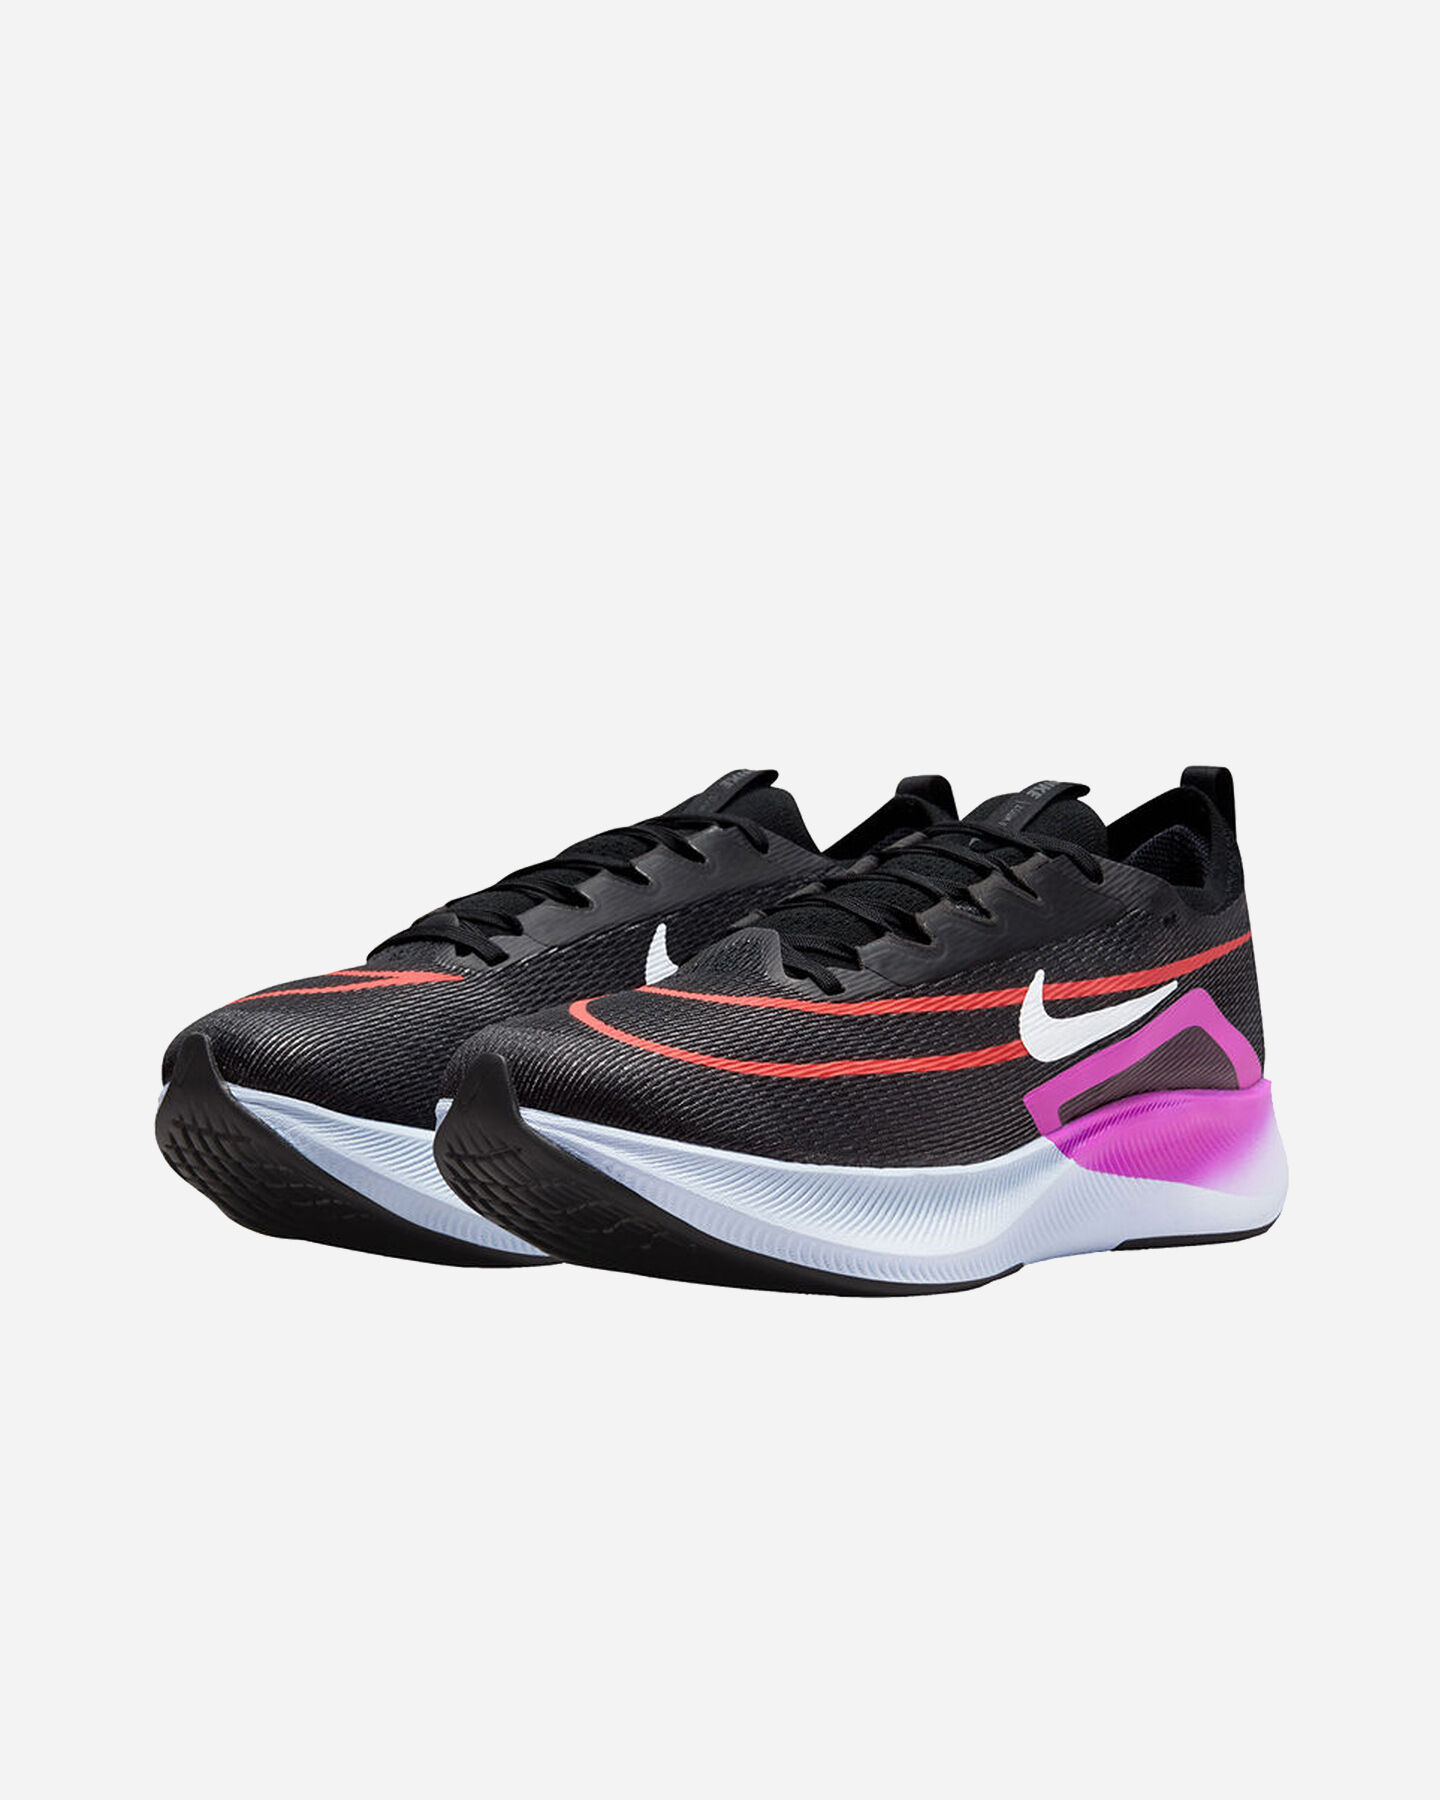  Scarpe running NIKE ZOOM FLY 4 M S5386060 scatto 1